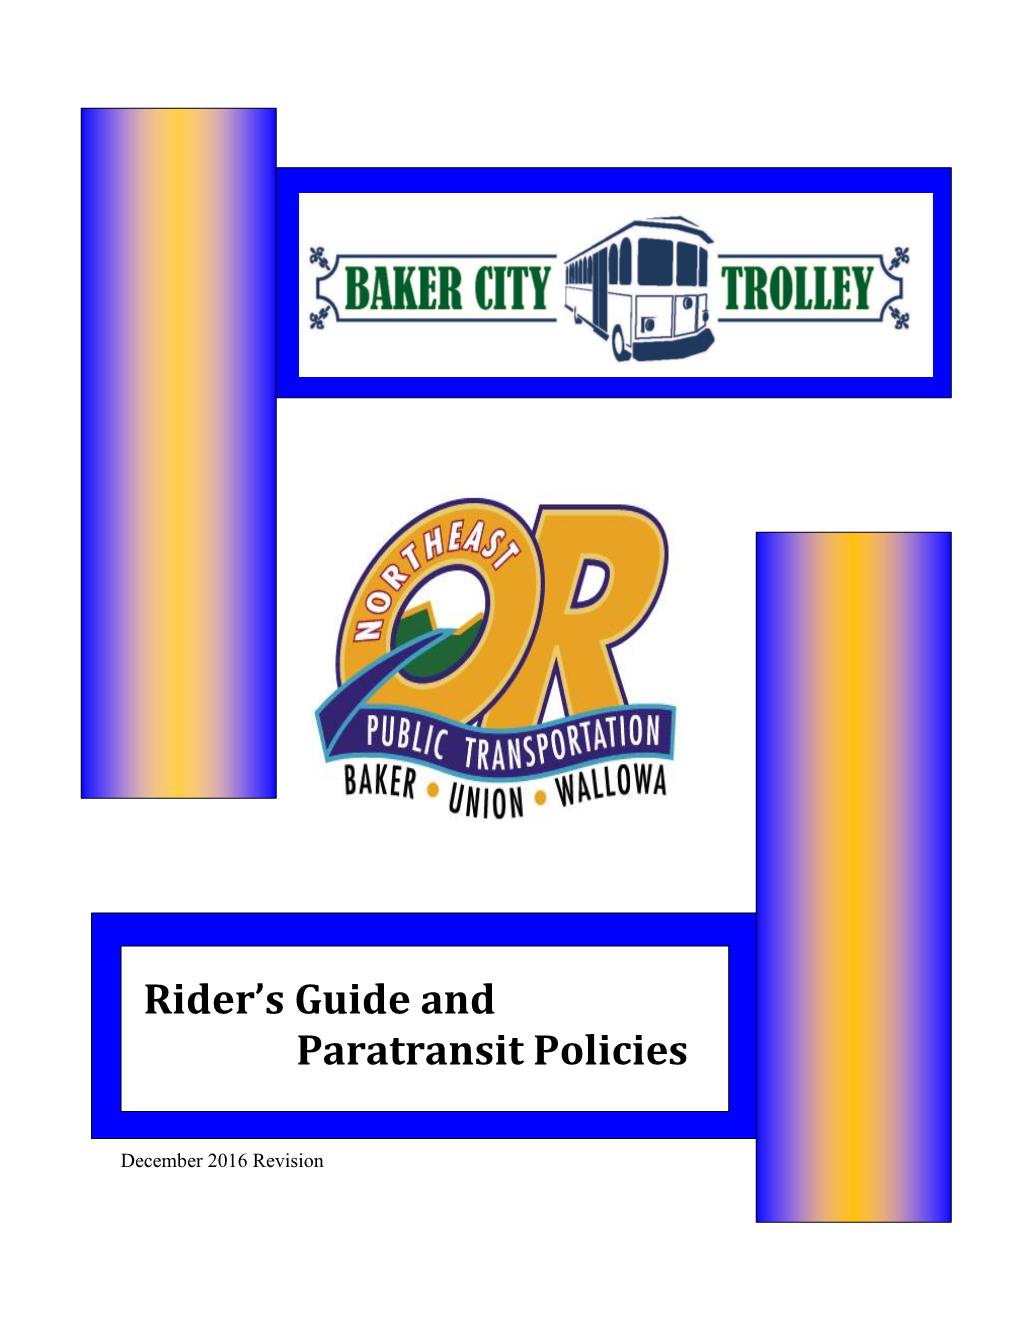 Rider's Guide and Paratransit Policies